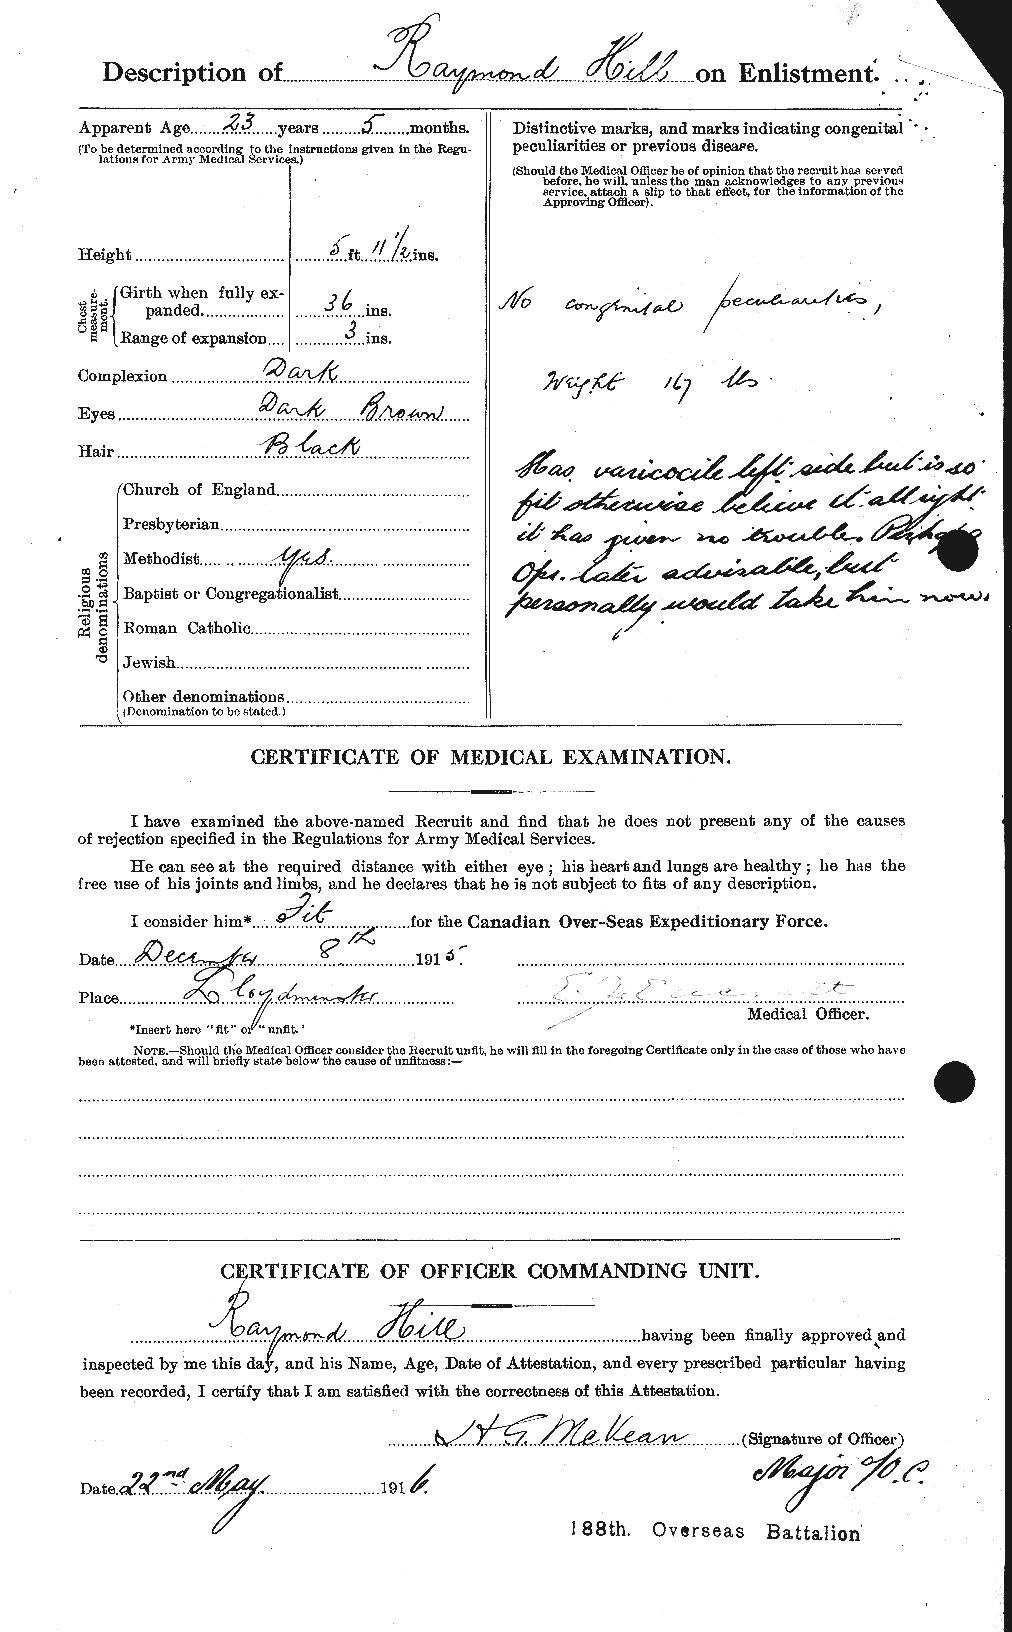 Personnel Records of the First World War - CEF 404341b